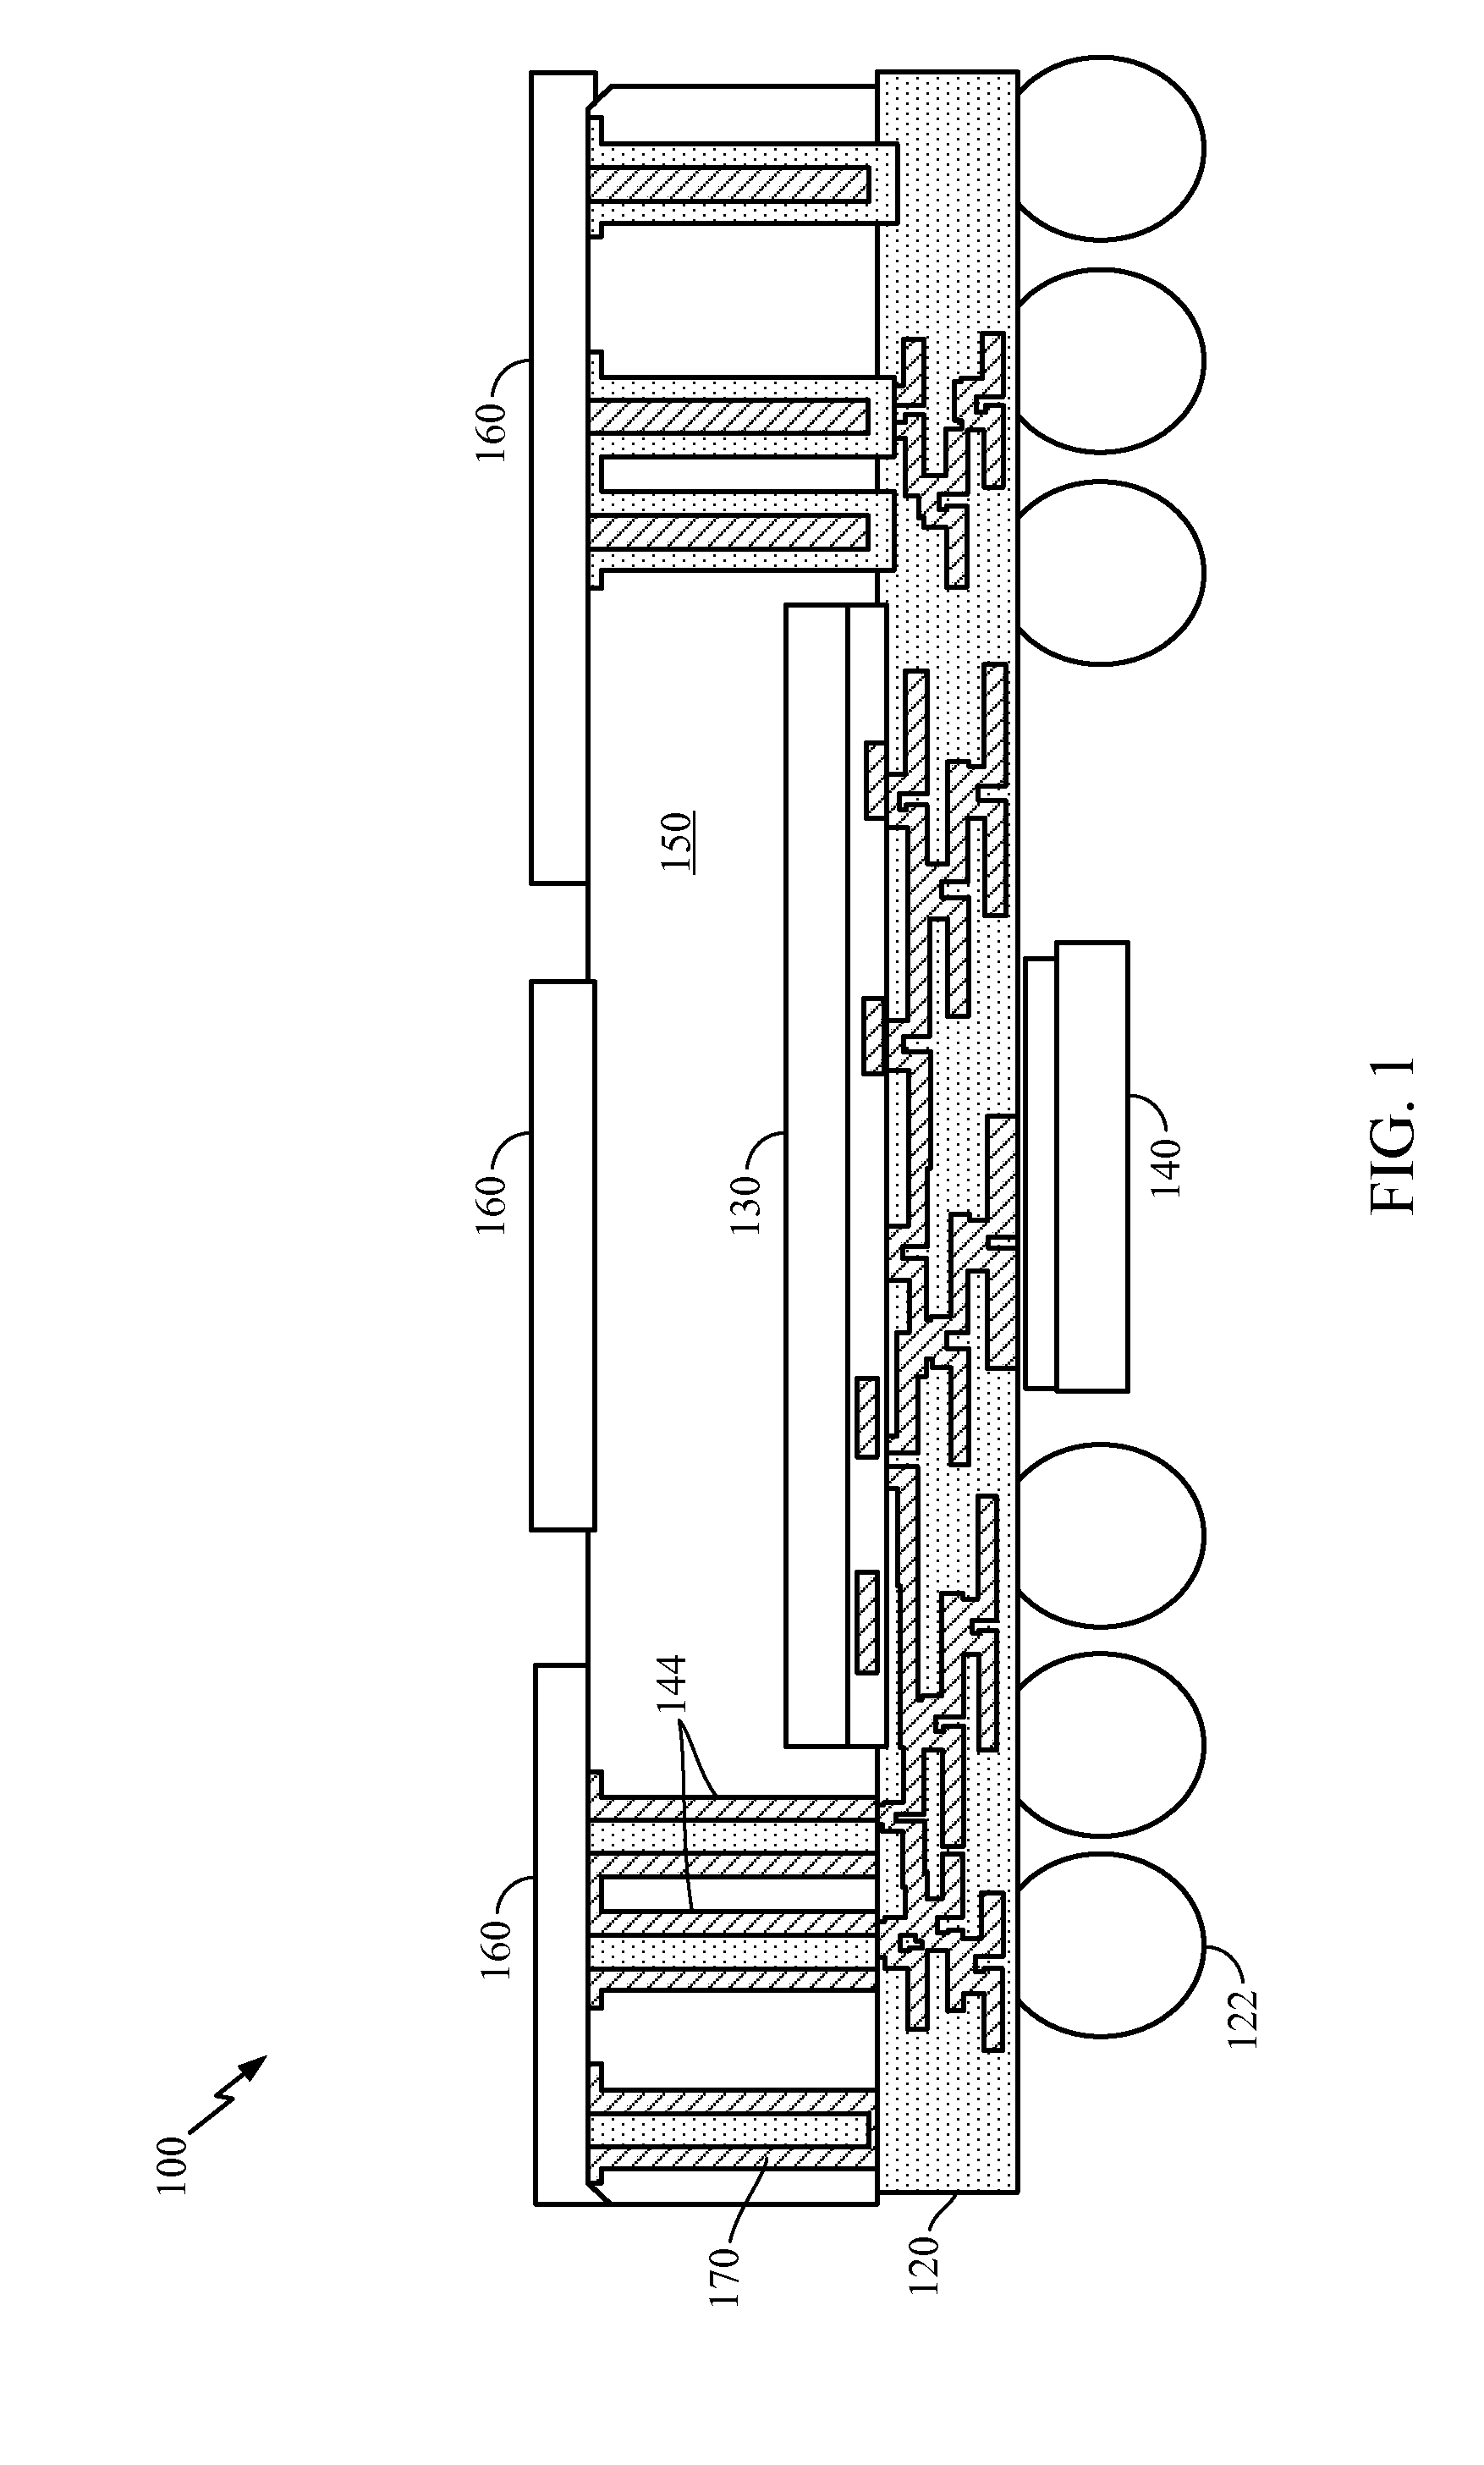 Semiconductor package with incorporated inductance element